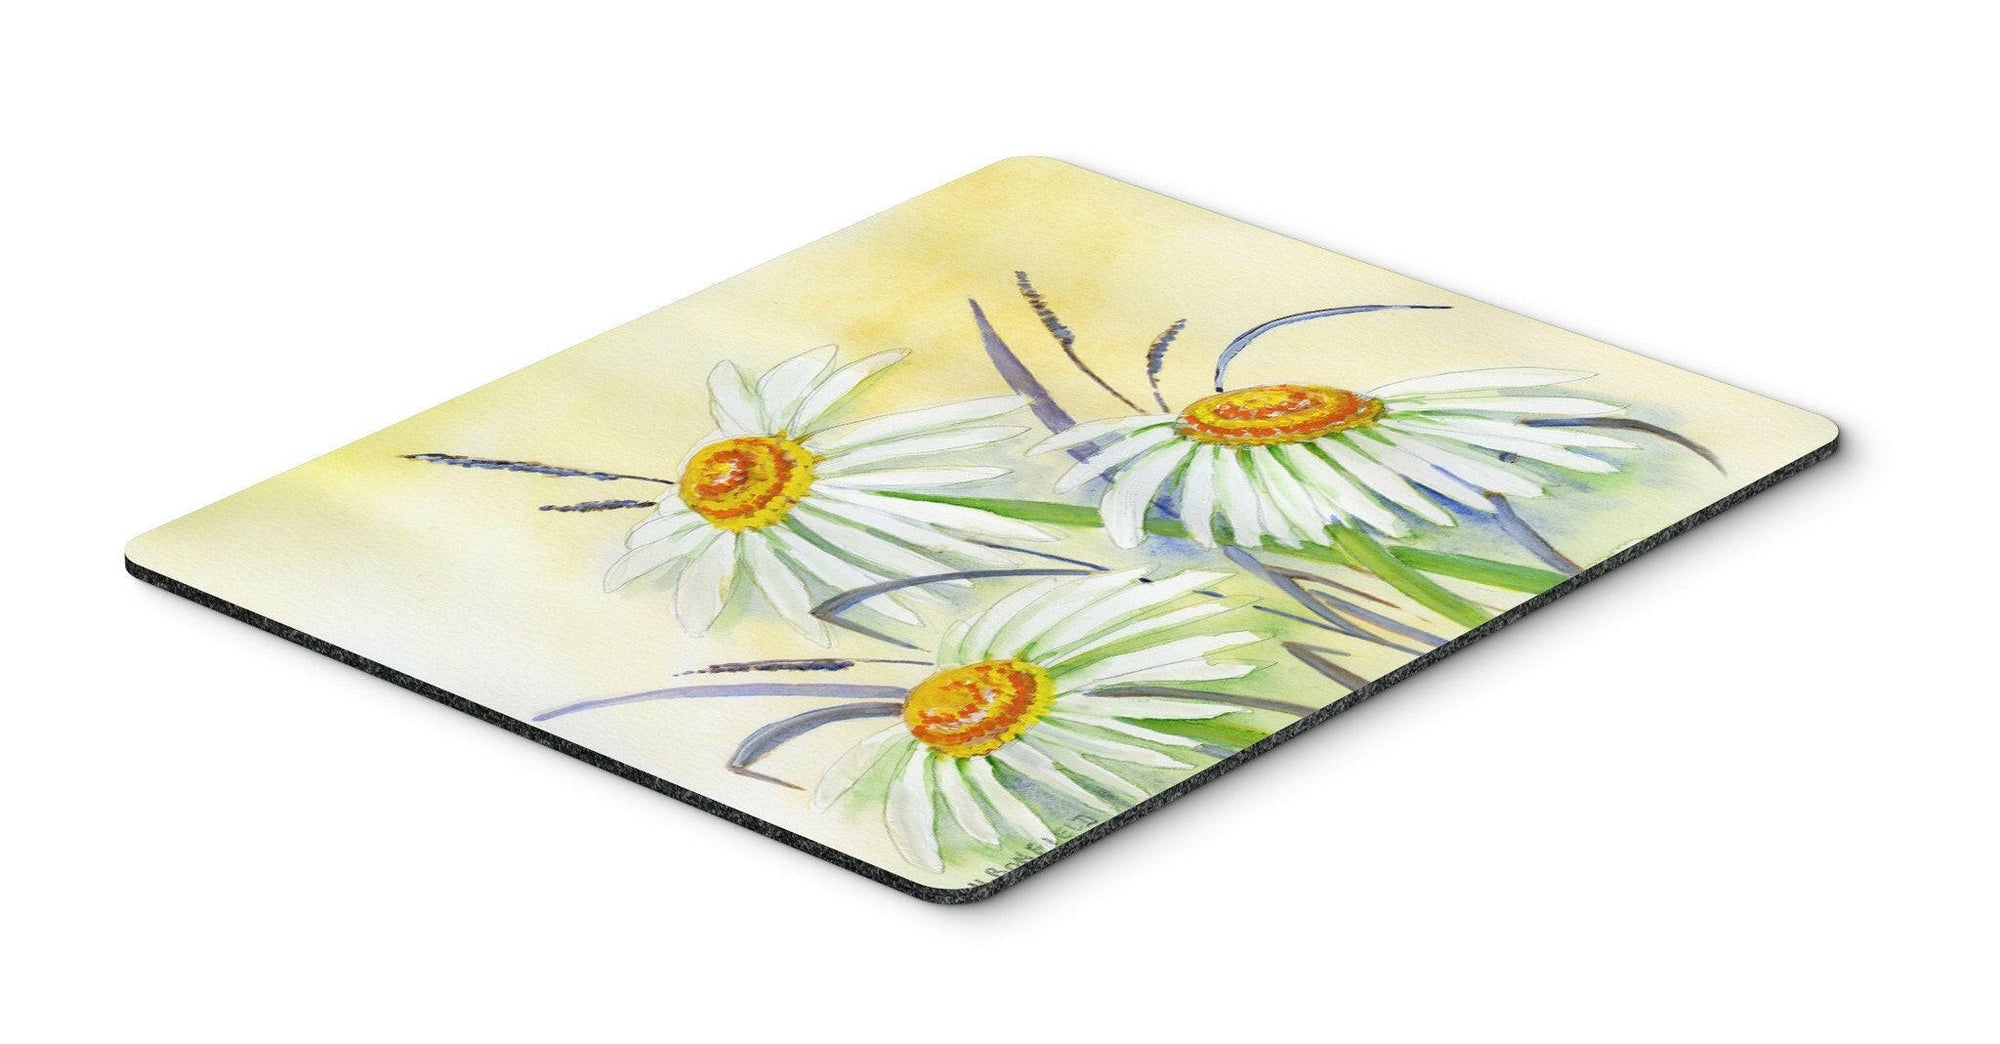 Daisies by Maureen Bonfield Mouse Pad, Hot Pad or Trivet BMBO1108MP by Caroline's Treasures